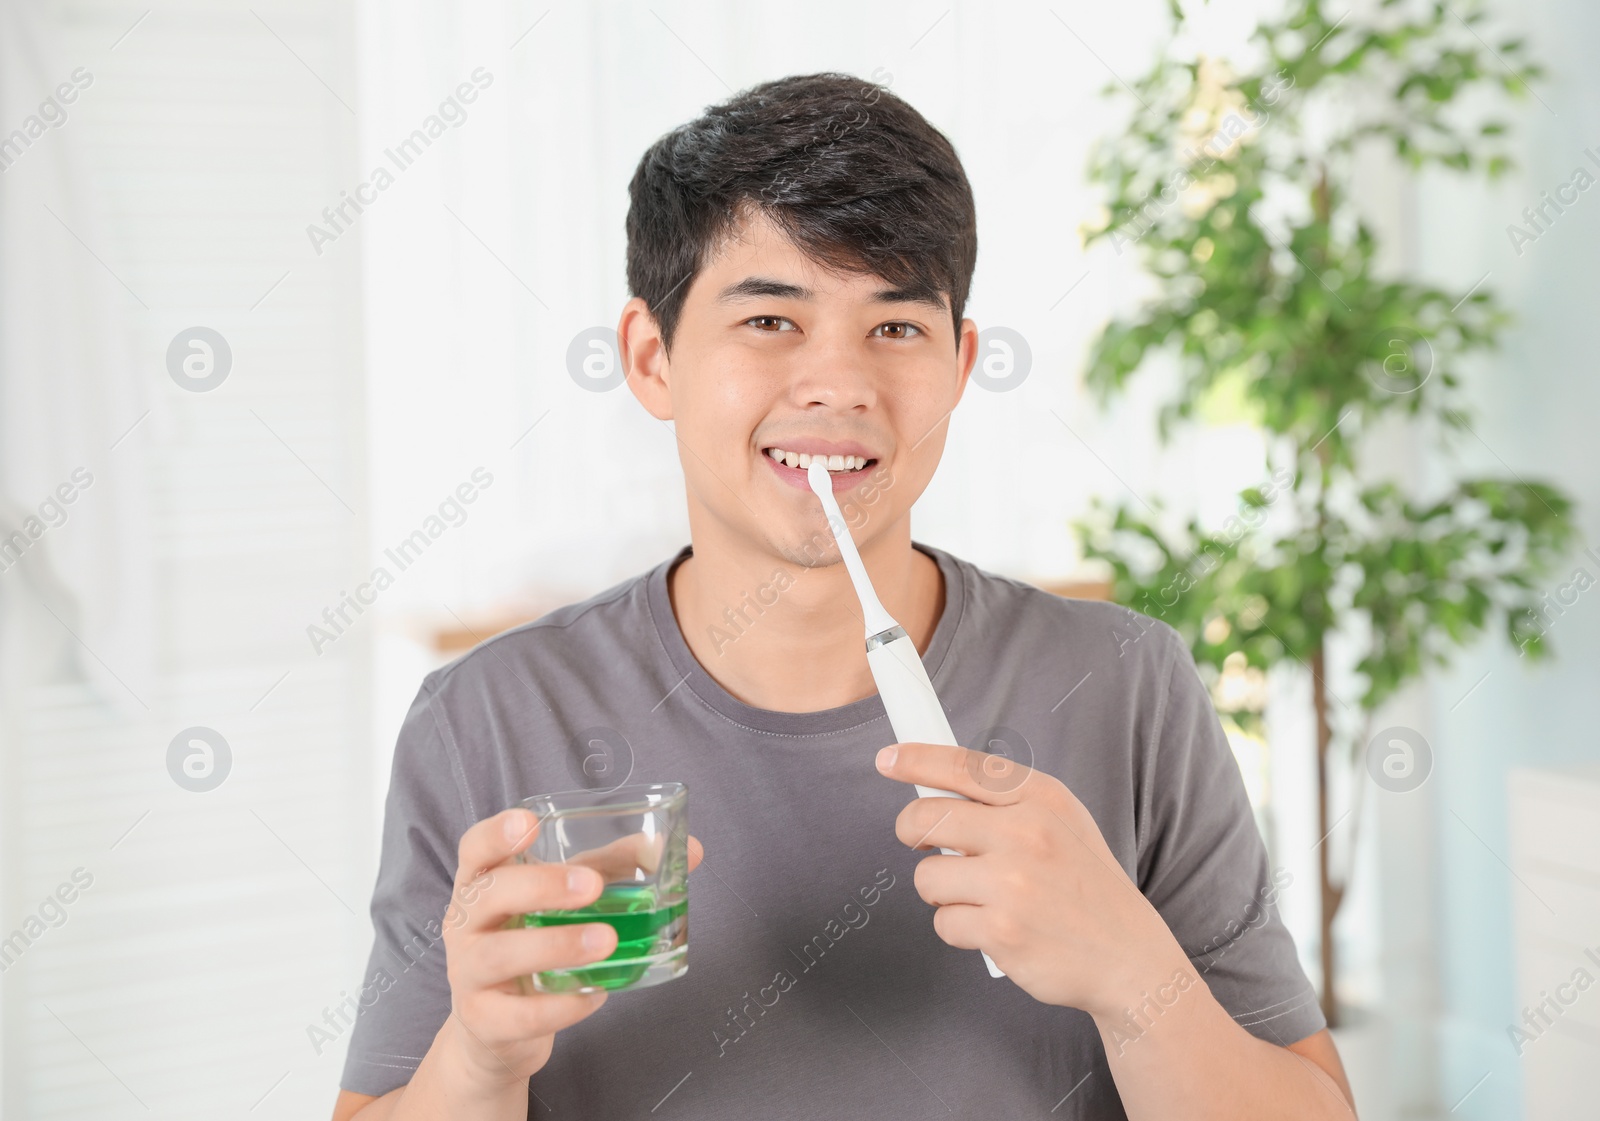 Photo of Man brushing teeth and holding glass with mouthwash in bathroom